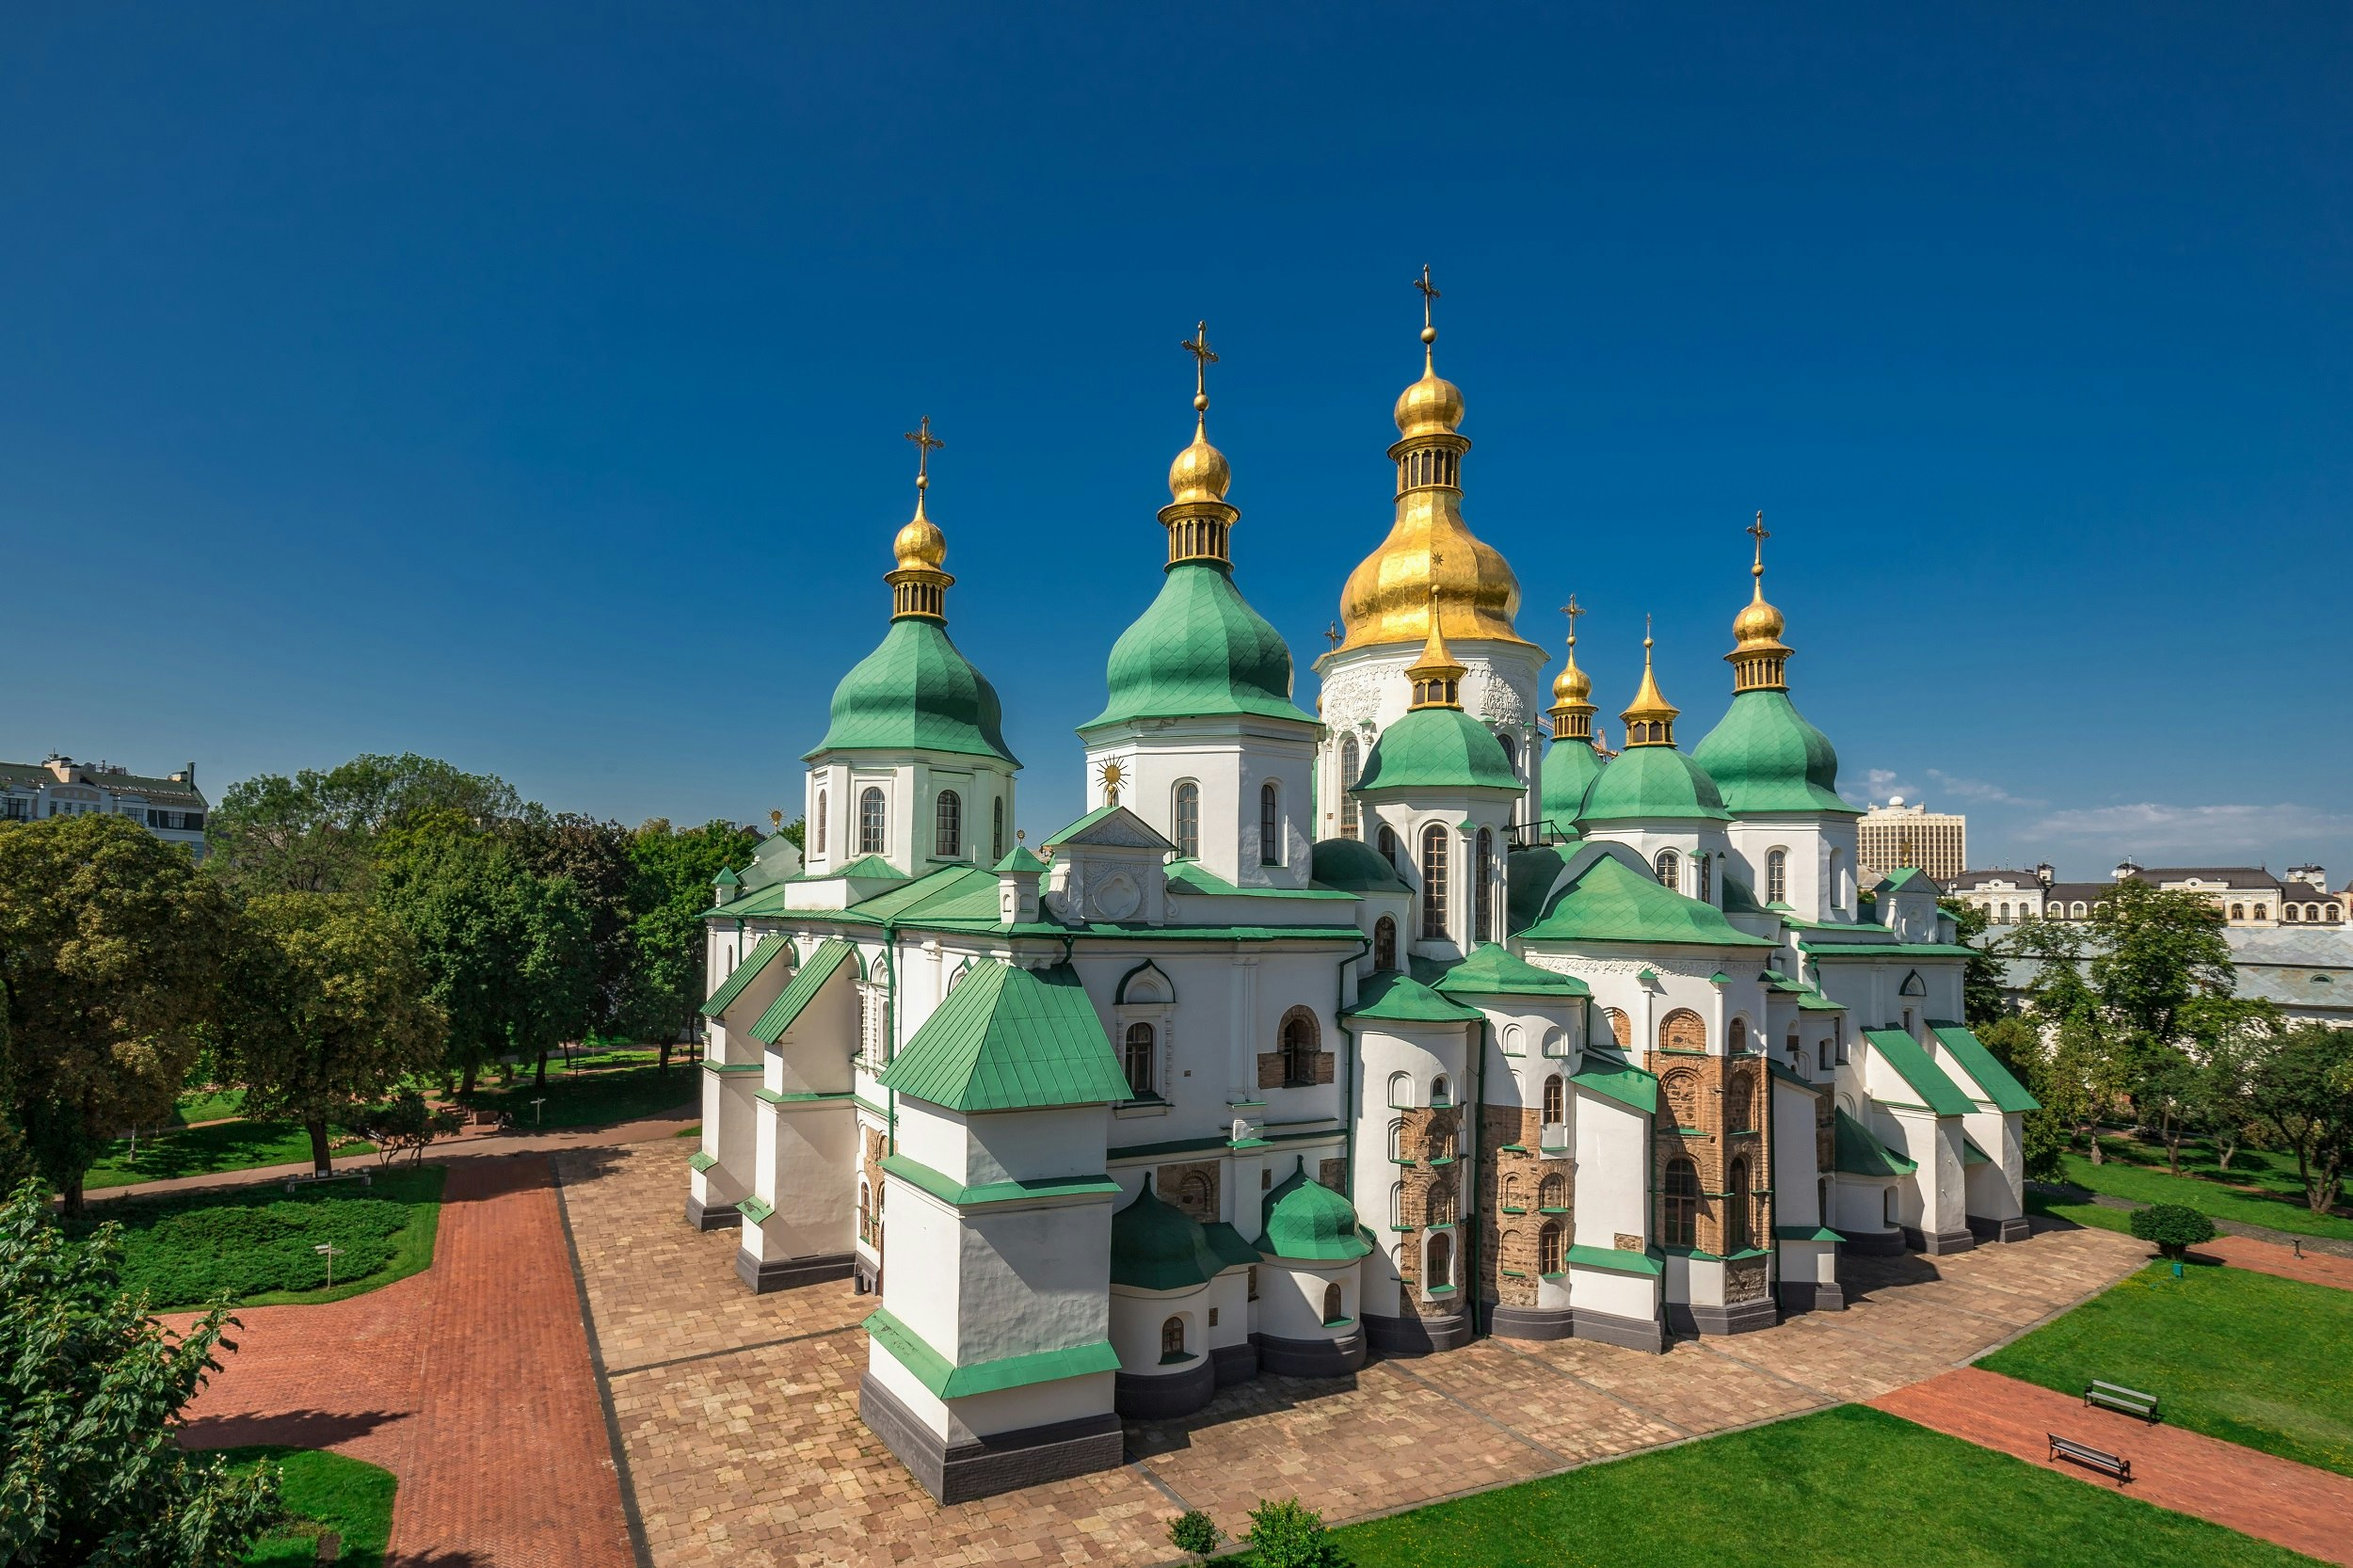 A large cathedral with domed green roofs with one large gold dome in the centre